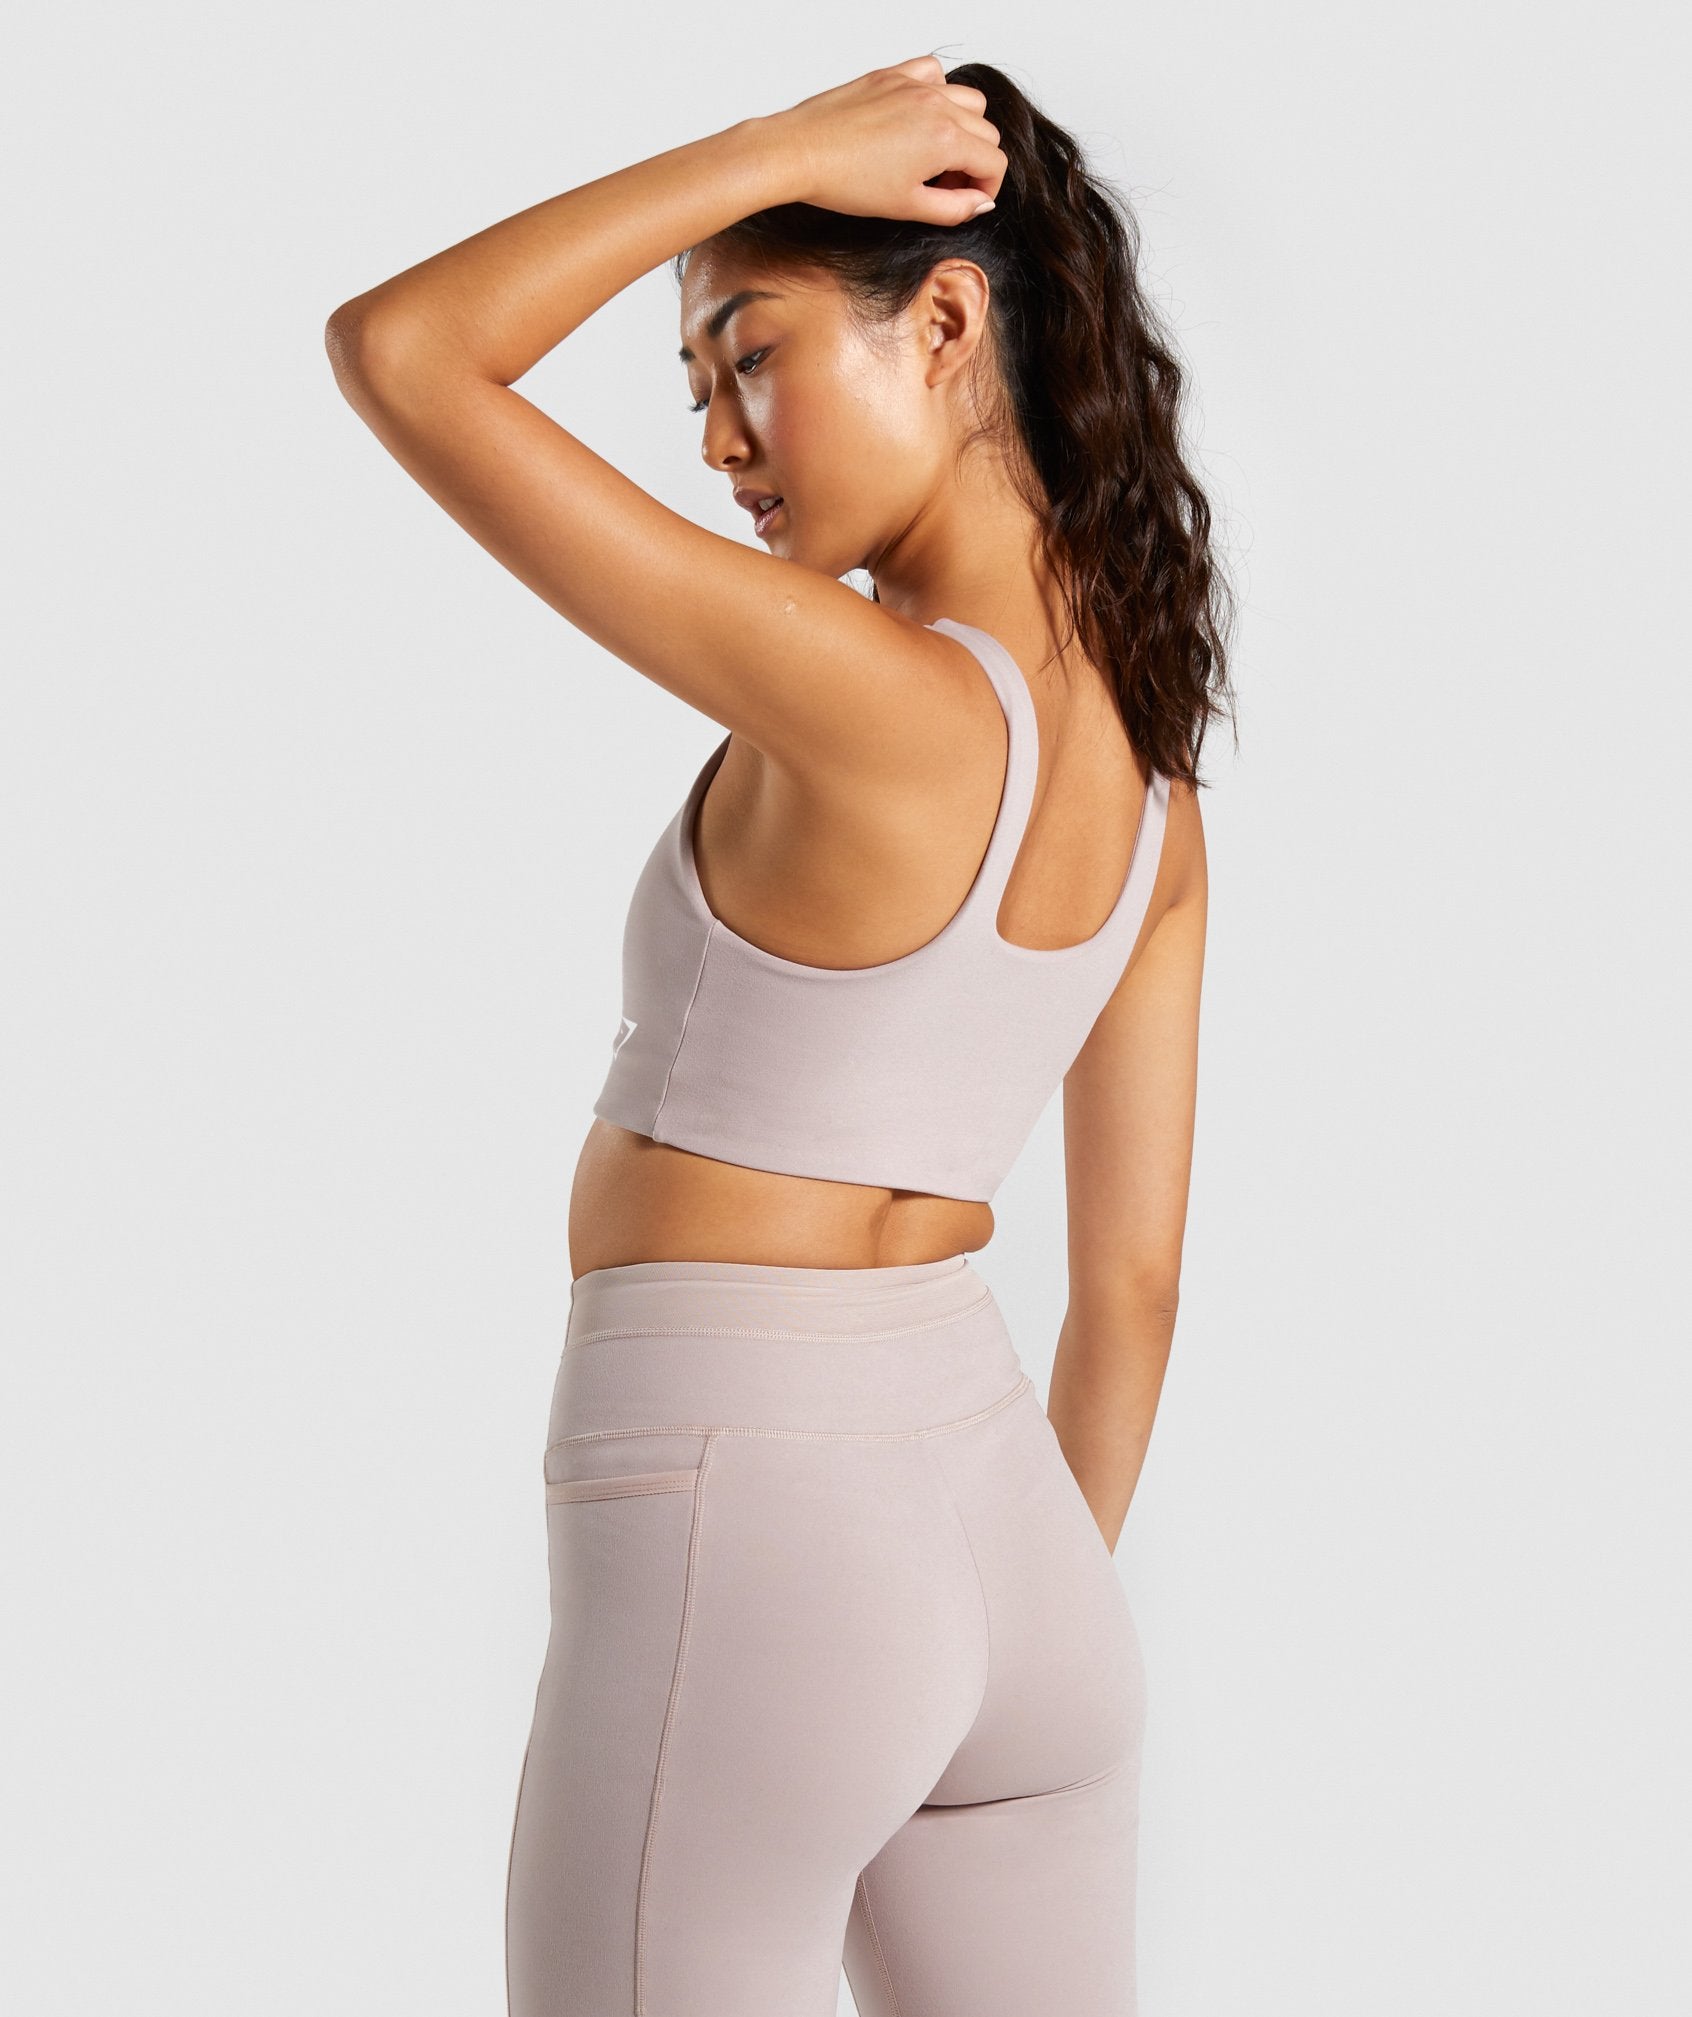 Dreamy Sports Bra in Taupe/White - view 3